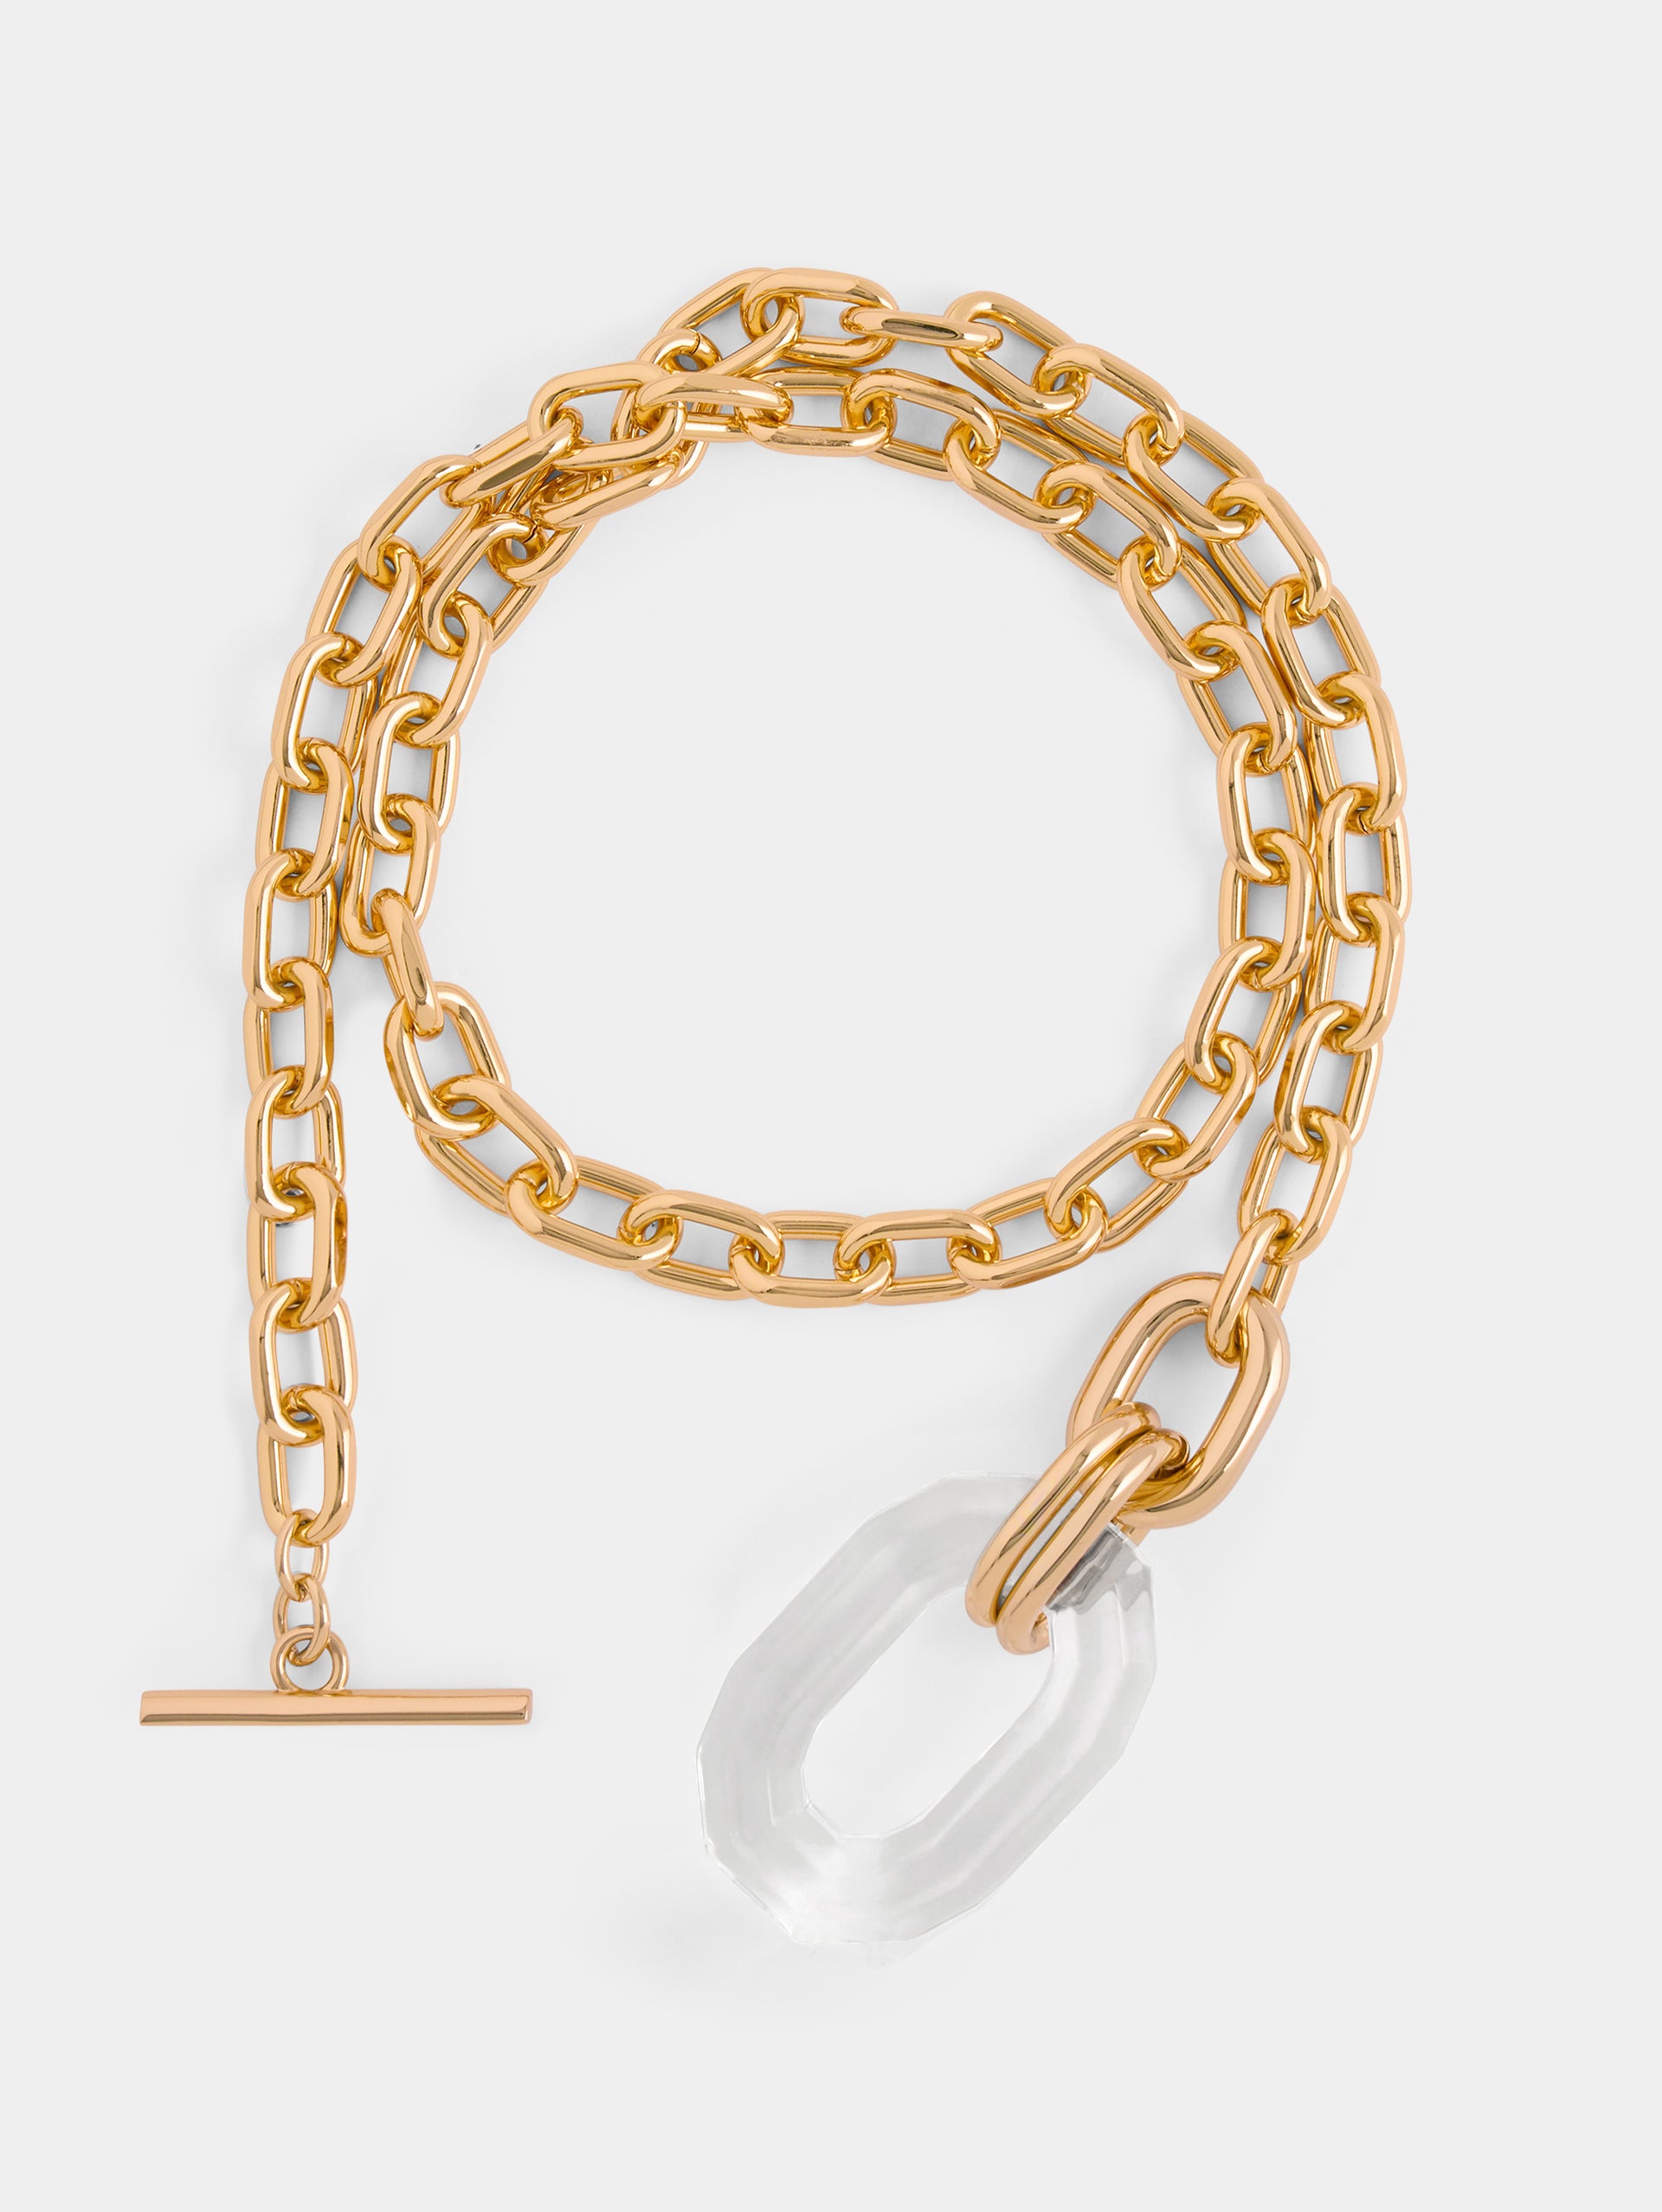 Gold and transparent double XL link necklace with pendant